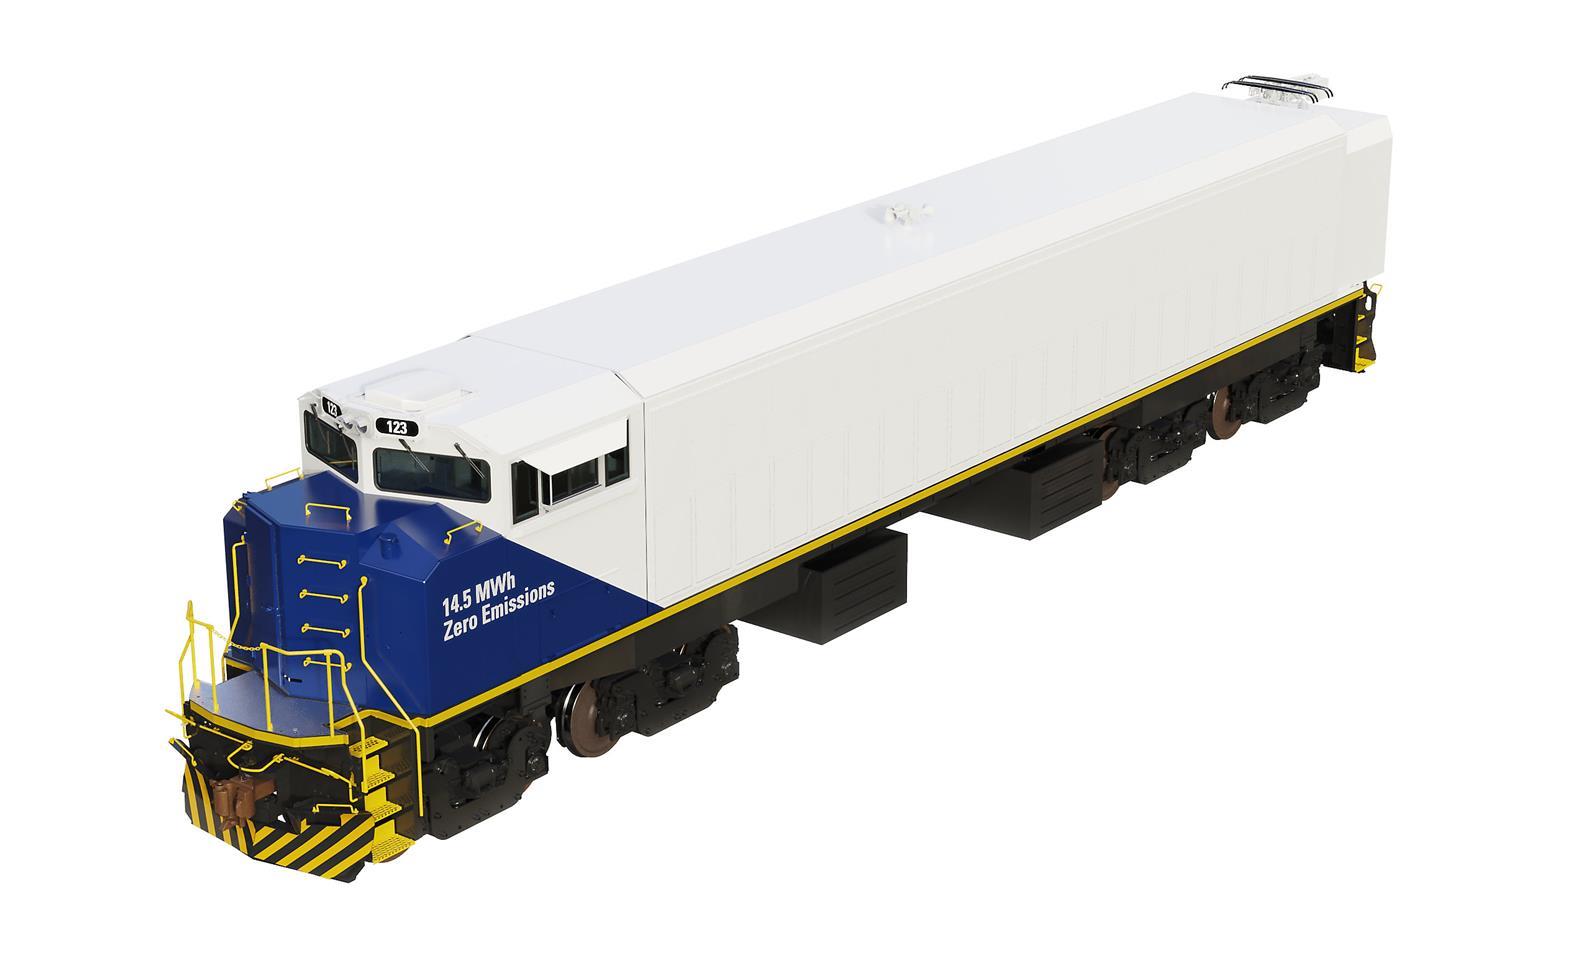 Render of the EMD Joule battery locomotive for Fortescue Metals Group